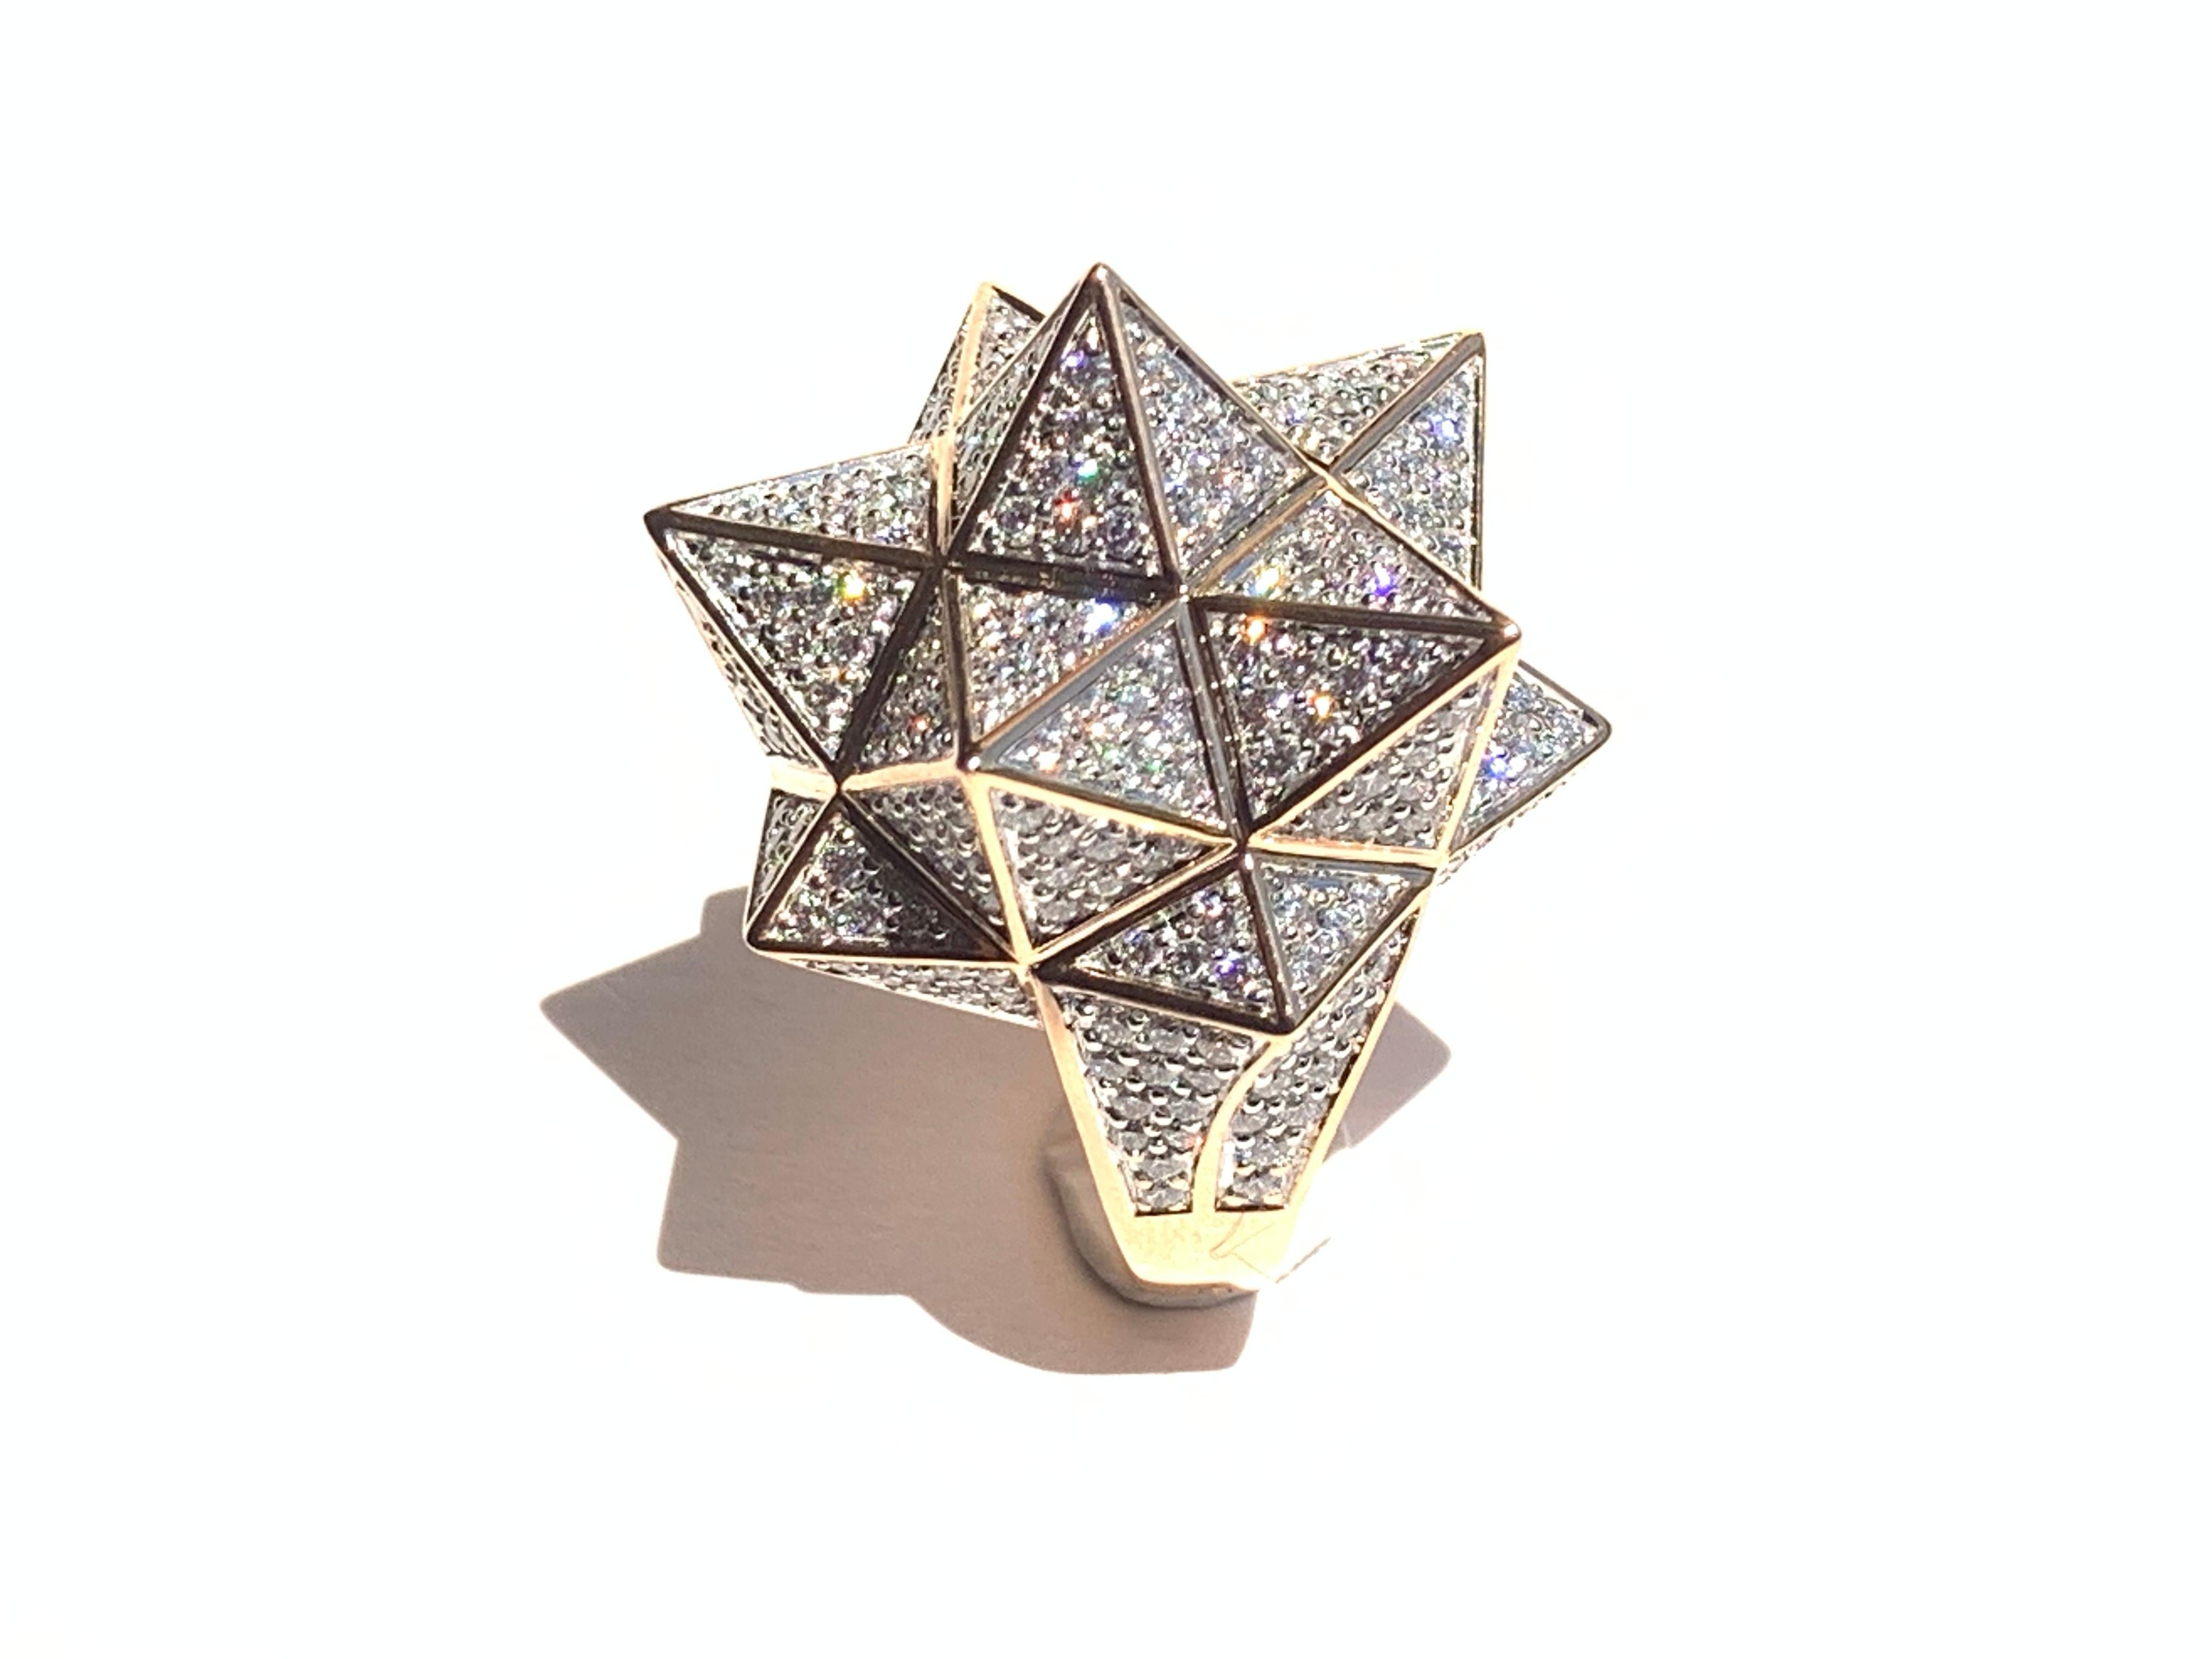 Star Tetra Diamond Ring In New Condition For Sale In Coral Gables, FL